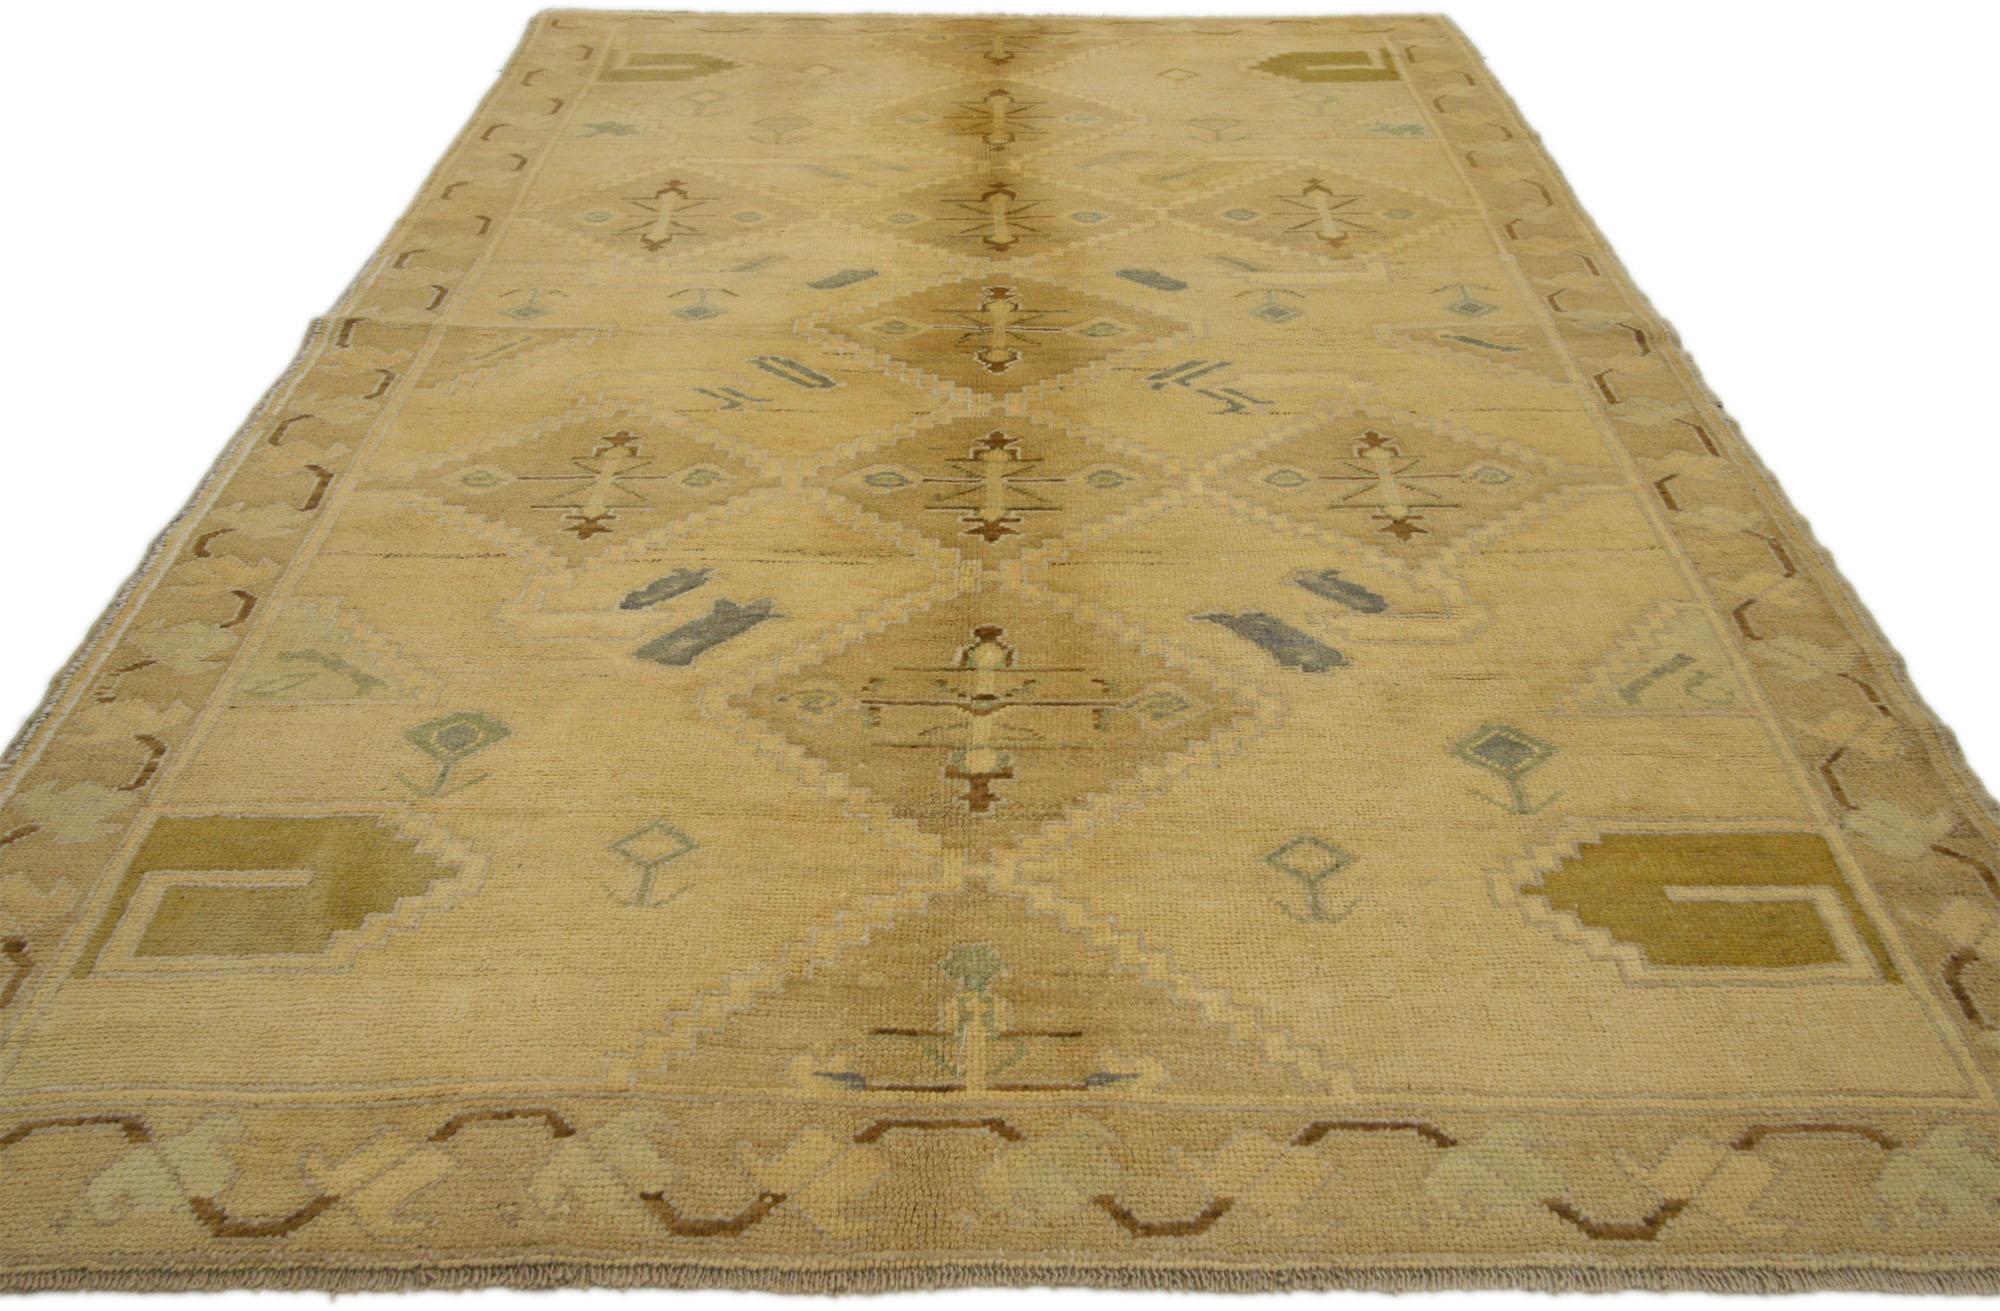 51342 Vintage Turkish Oushak rug with Modern Shaker Style 04'10 x 07'04. Effortless beauty and simplicity meet soft, bespoke vibes with a modern Shaker style in this hand knotted wool vintage Turkish Oushak rug. The antique washed ecru field